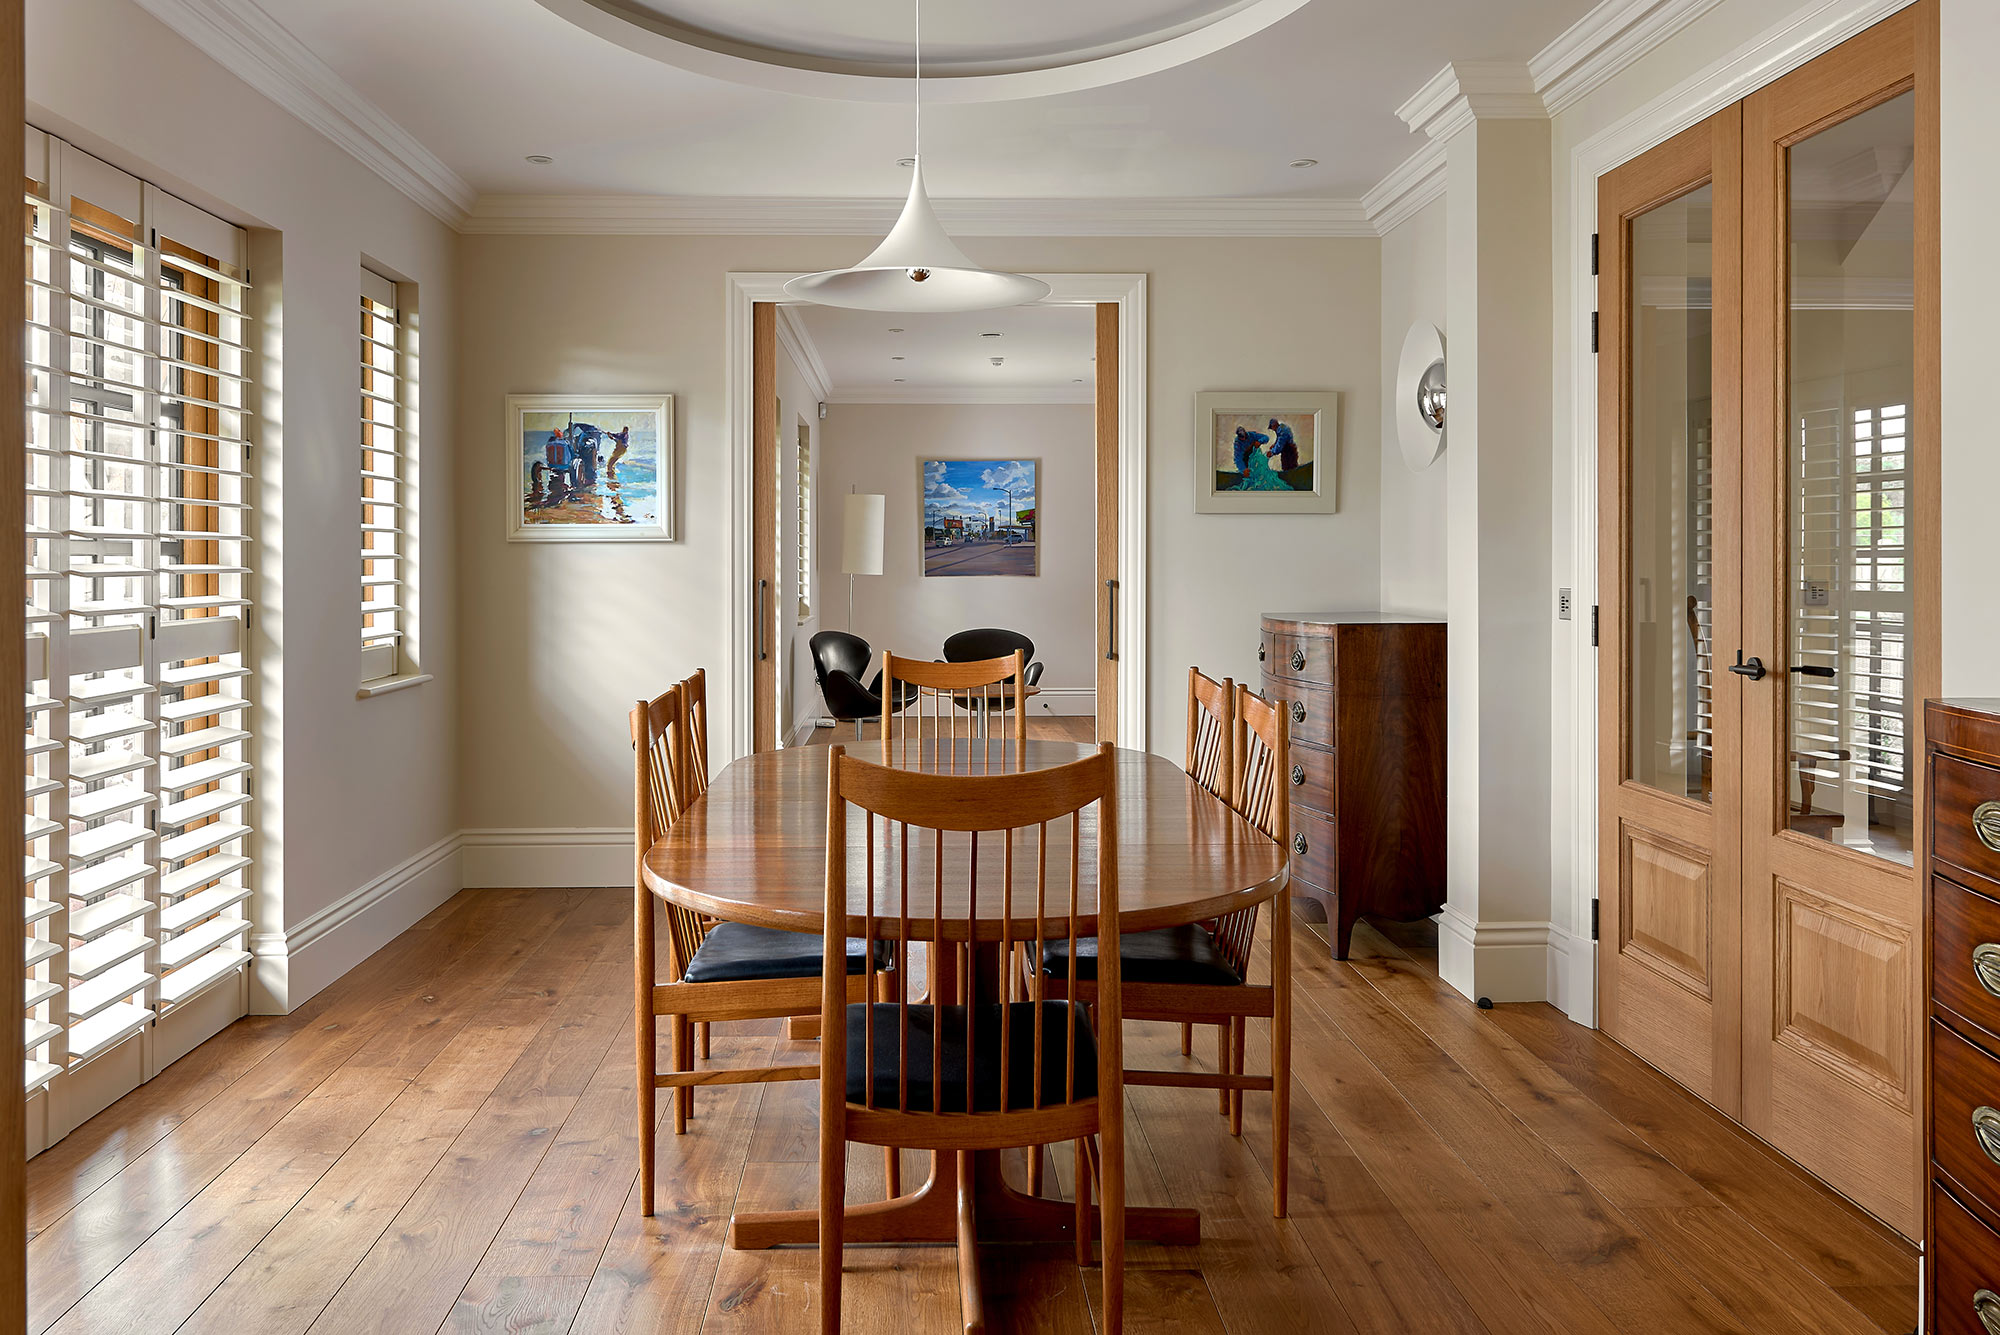 Dining room of New Arts and Crafts House - built by KM Grant, Guildford, Surrey.